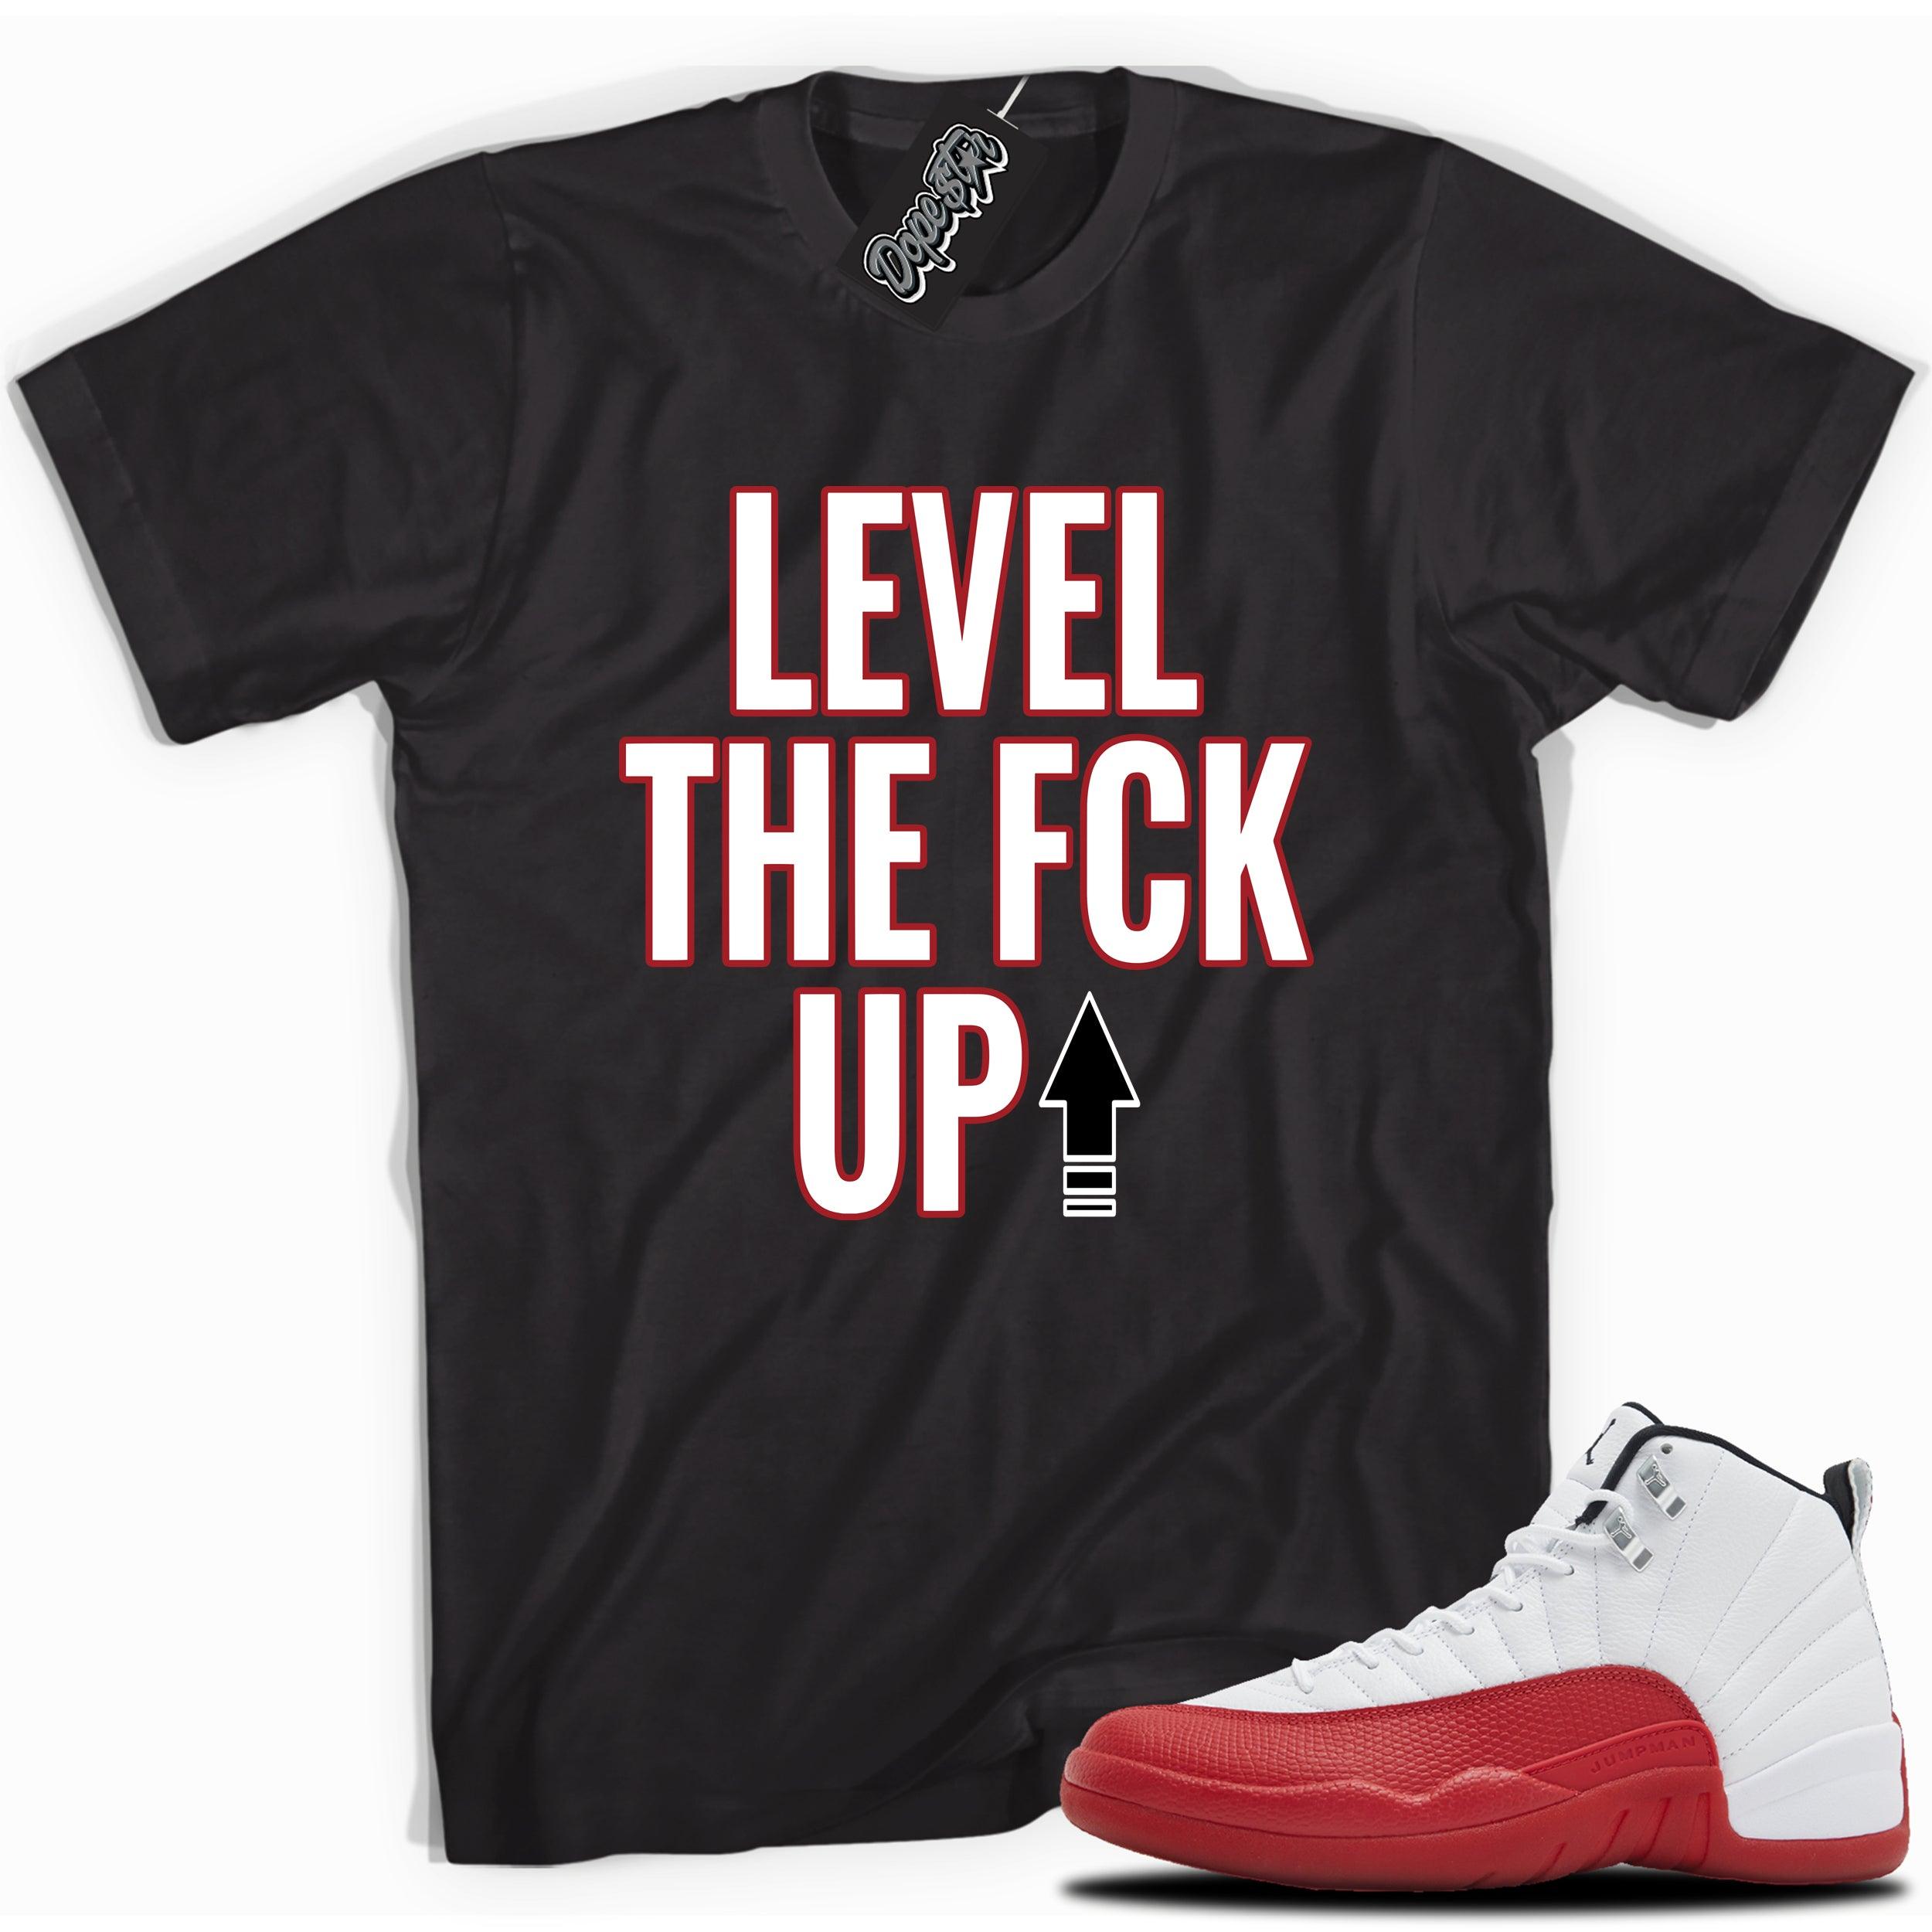 Cool Black graphic tee with “   Level The Fck Up  ” print, that perfectly matches Air Jordan 12 Retro Cherry Red 2023 red and white sneakers 